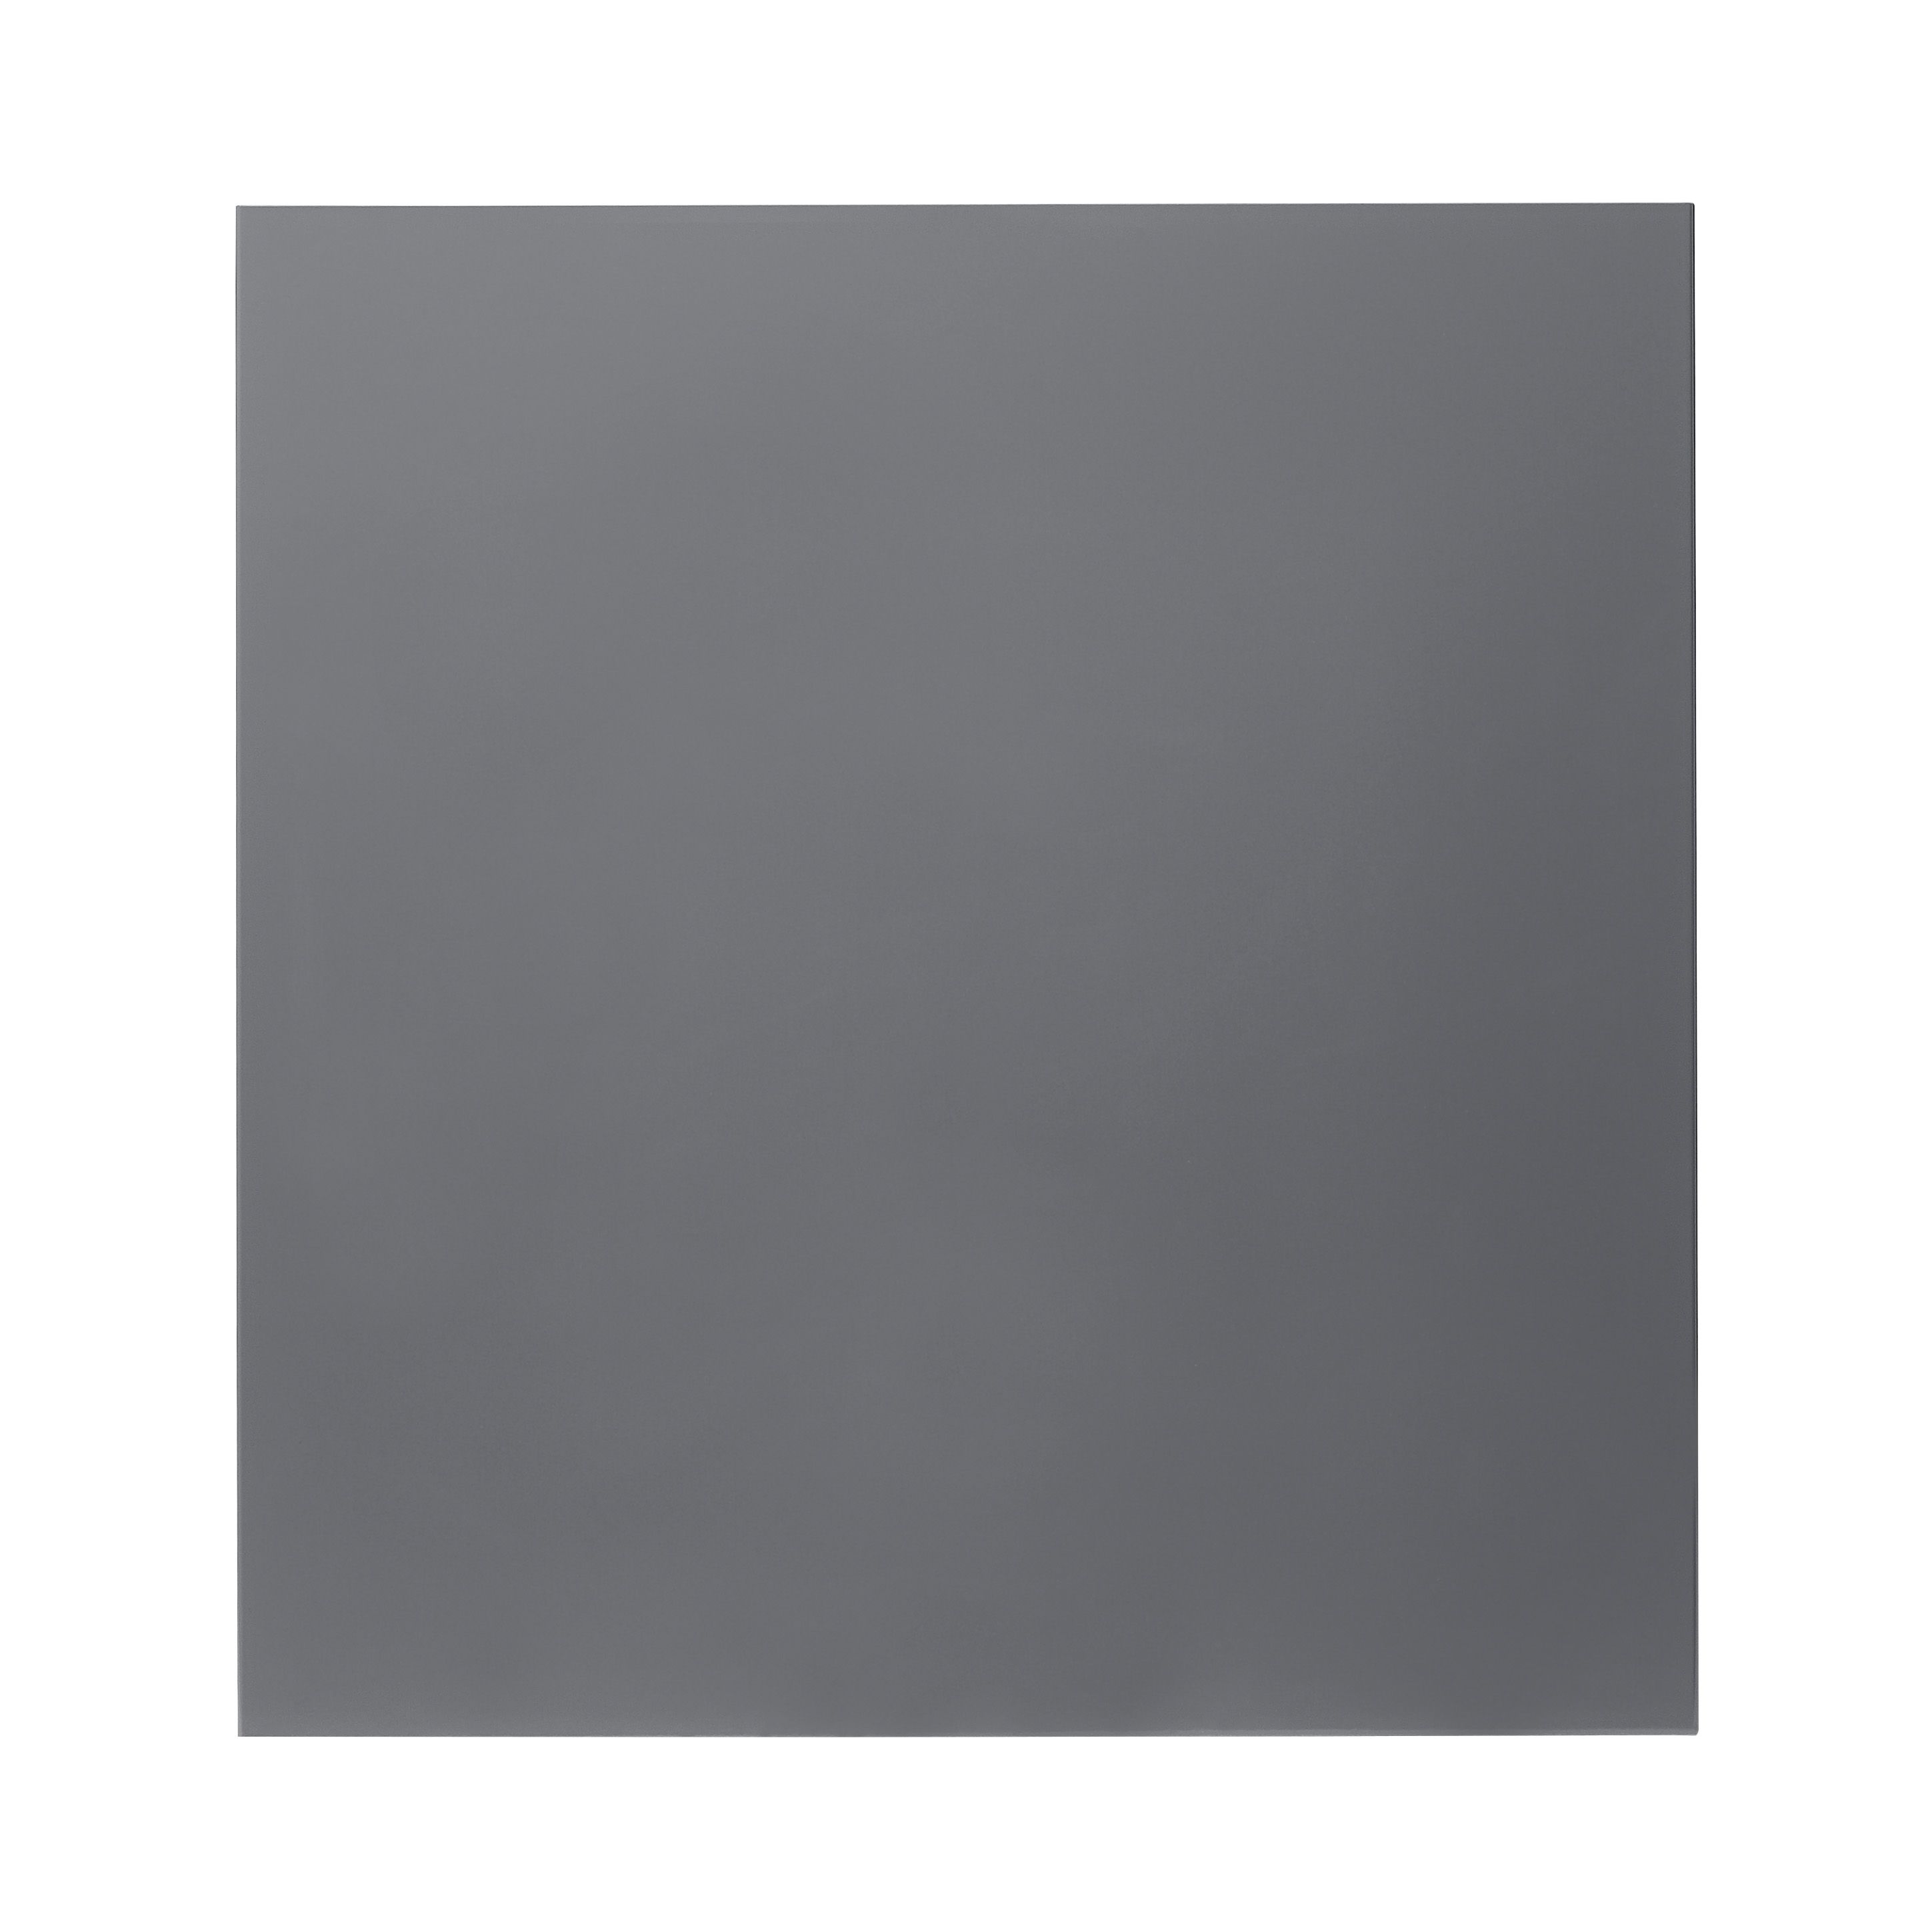 GoodHome Stevia Gloss anthracite slab Appliance Cabinet door (W)600mm (H)626mm (T)18mm